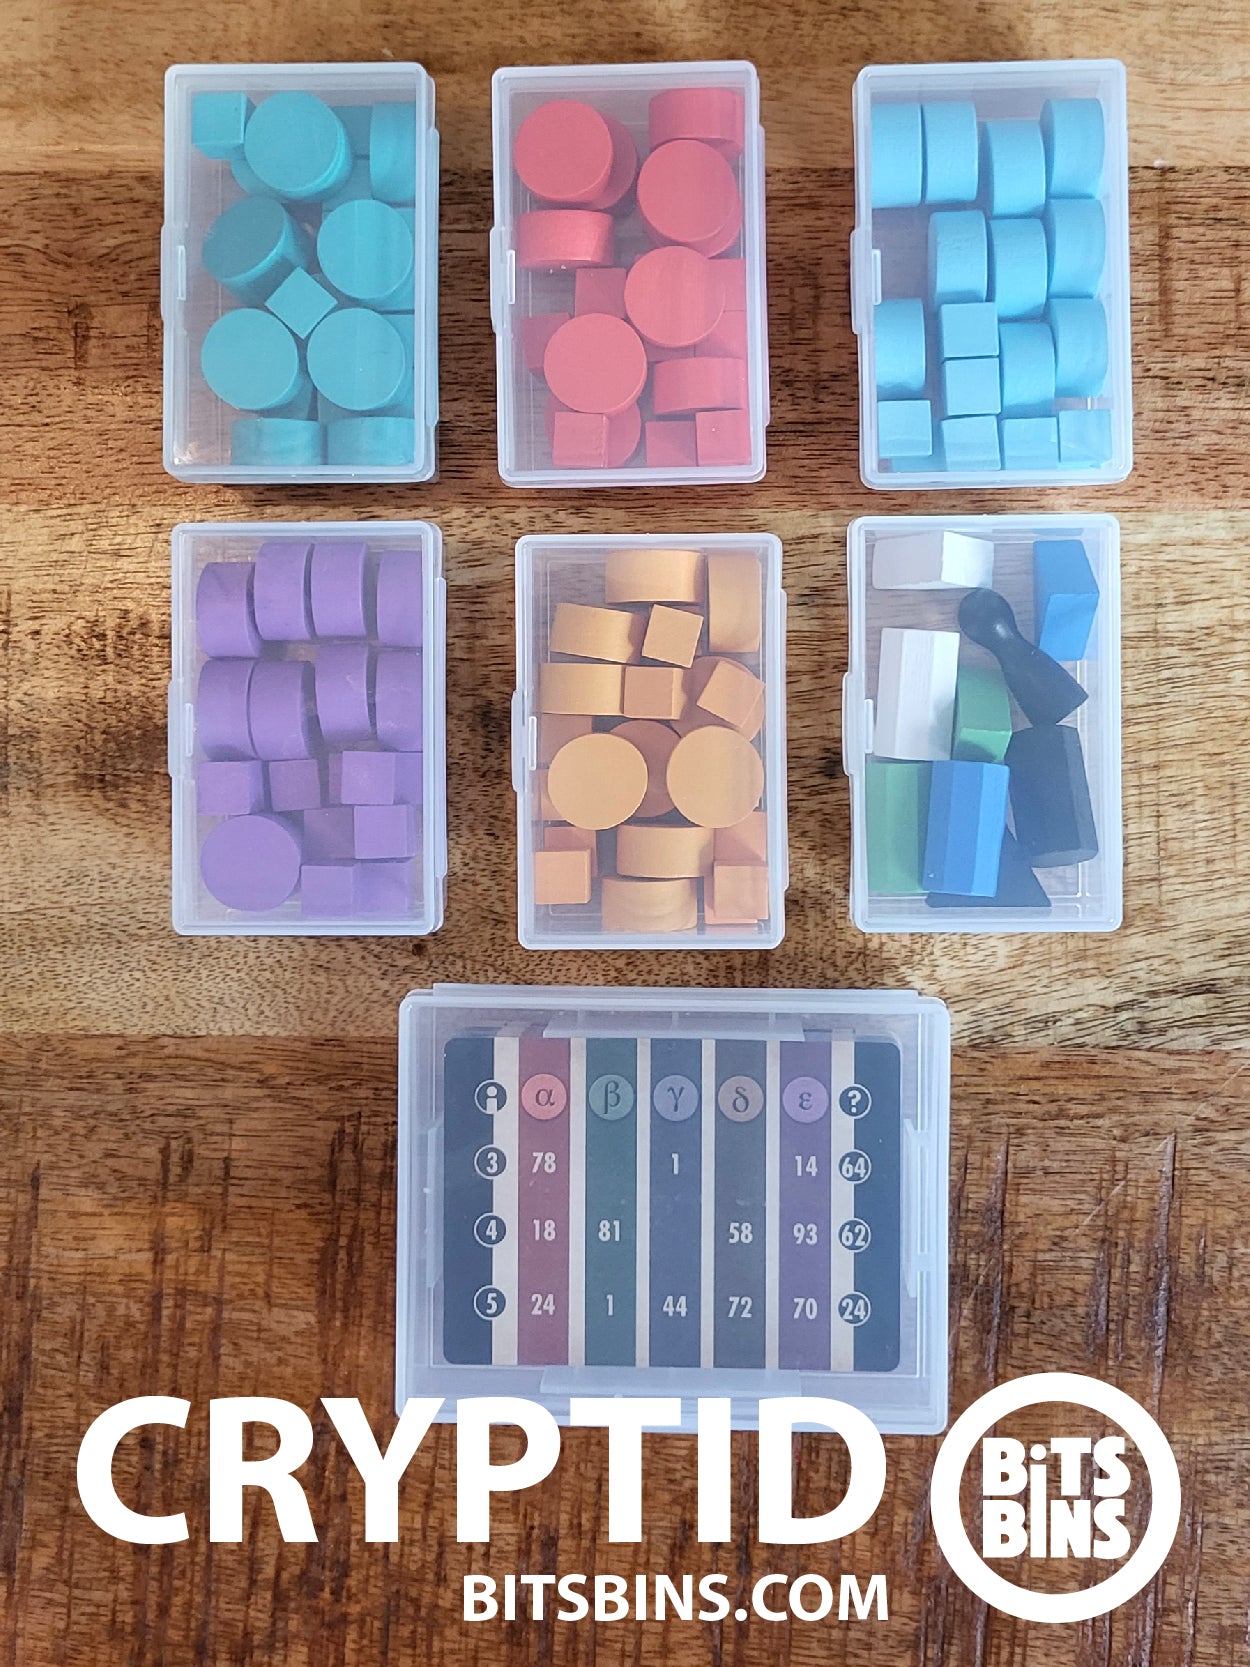 RECOMMENDED CRYPTID - 6 XLs, 1 Card Box